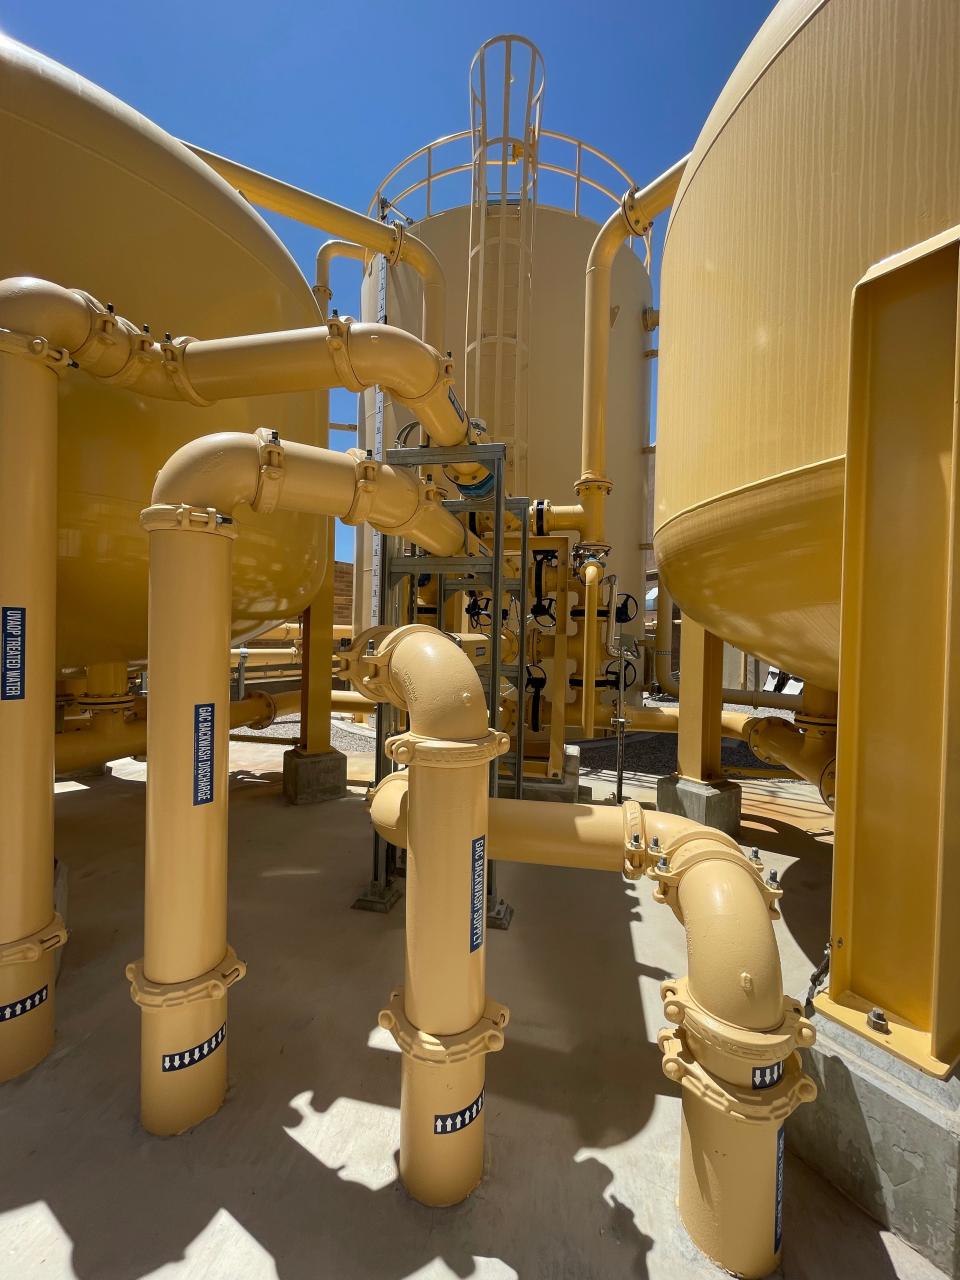 Marana's Picture Rocks Water Treatment campus is one of two treatment plants removing PFAS and 1,4 dioxane from drinking water. The facility, operating since 2021, treats water through a process that includes UV light, advanced oxidation, and granulated activated carbon filters.